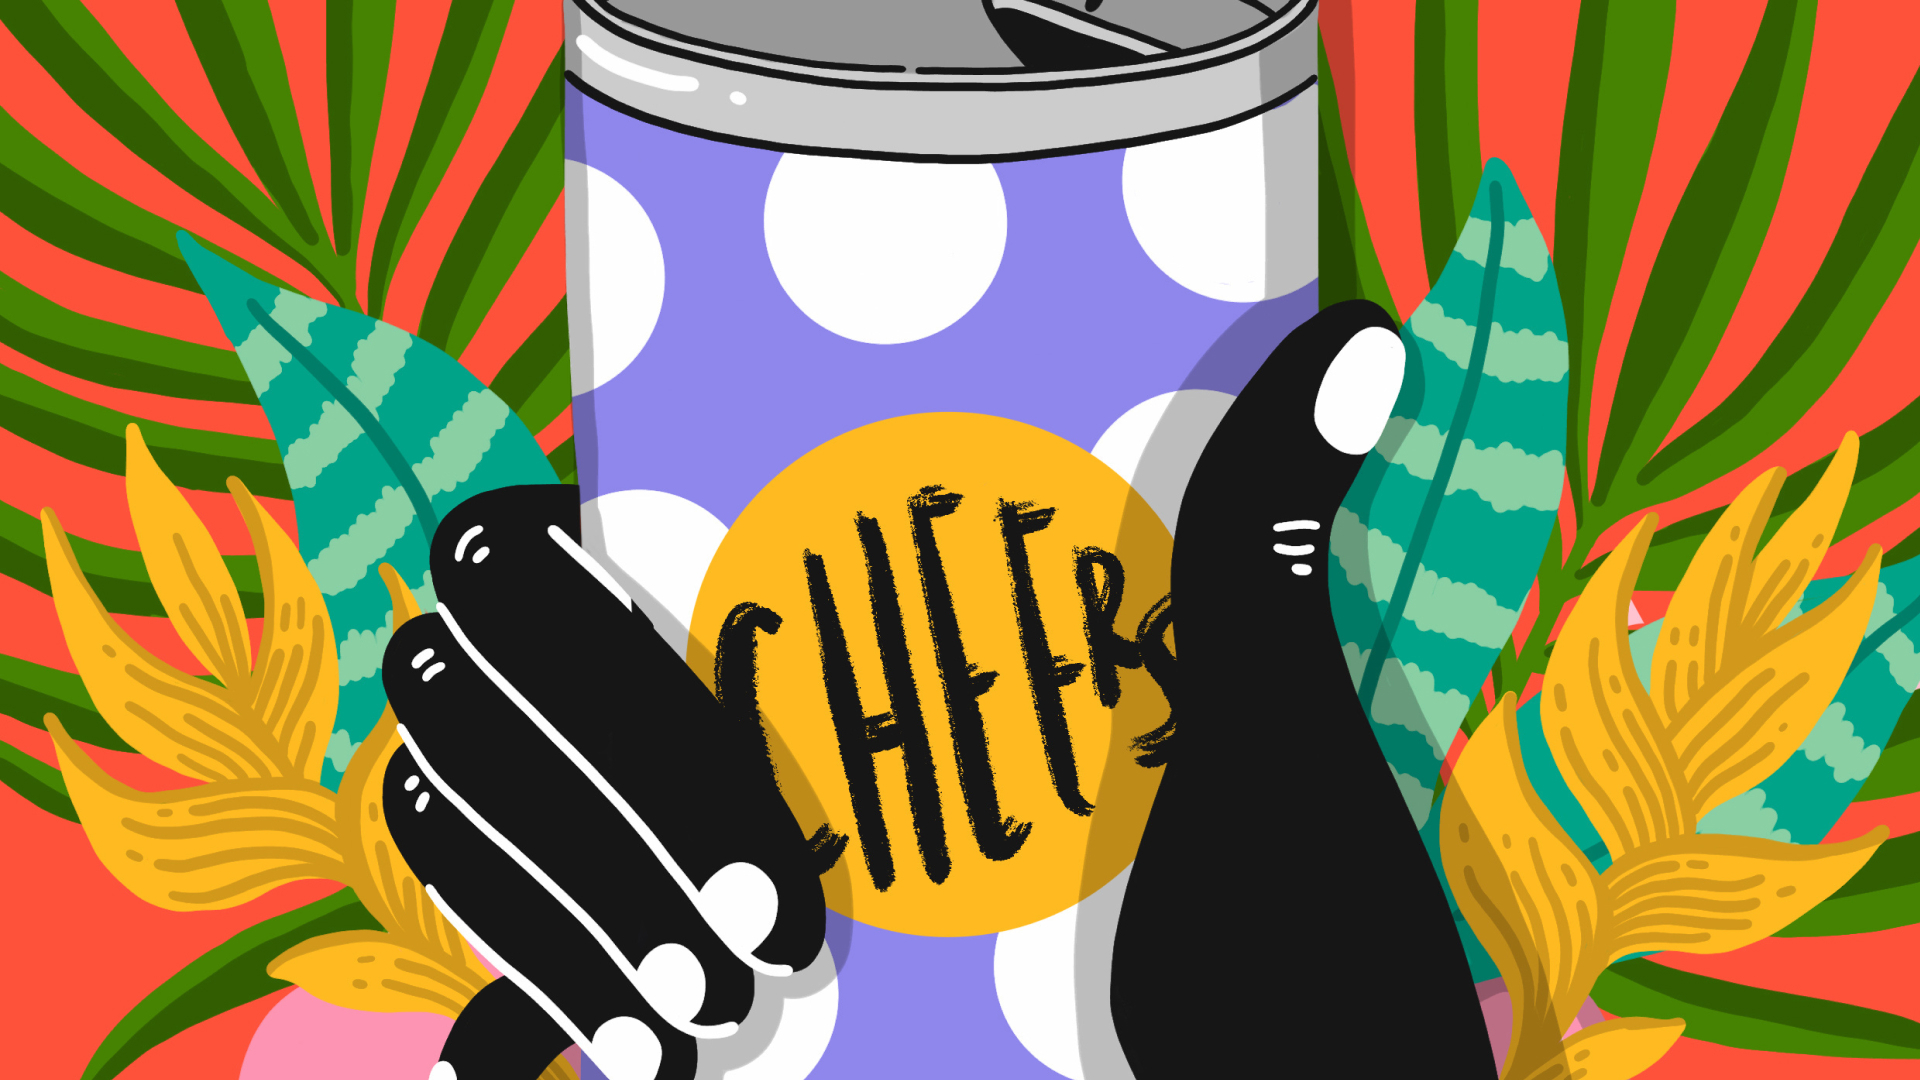 Colorful illustration of a hand holding a can that says “cheers.”